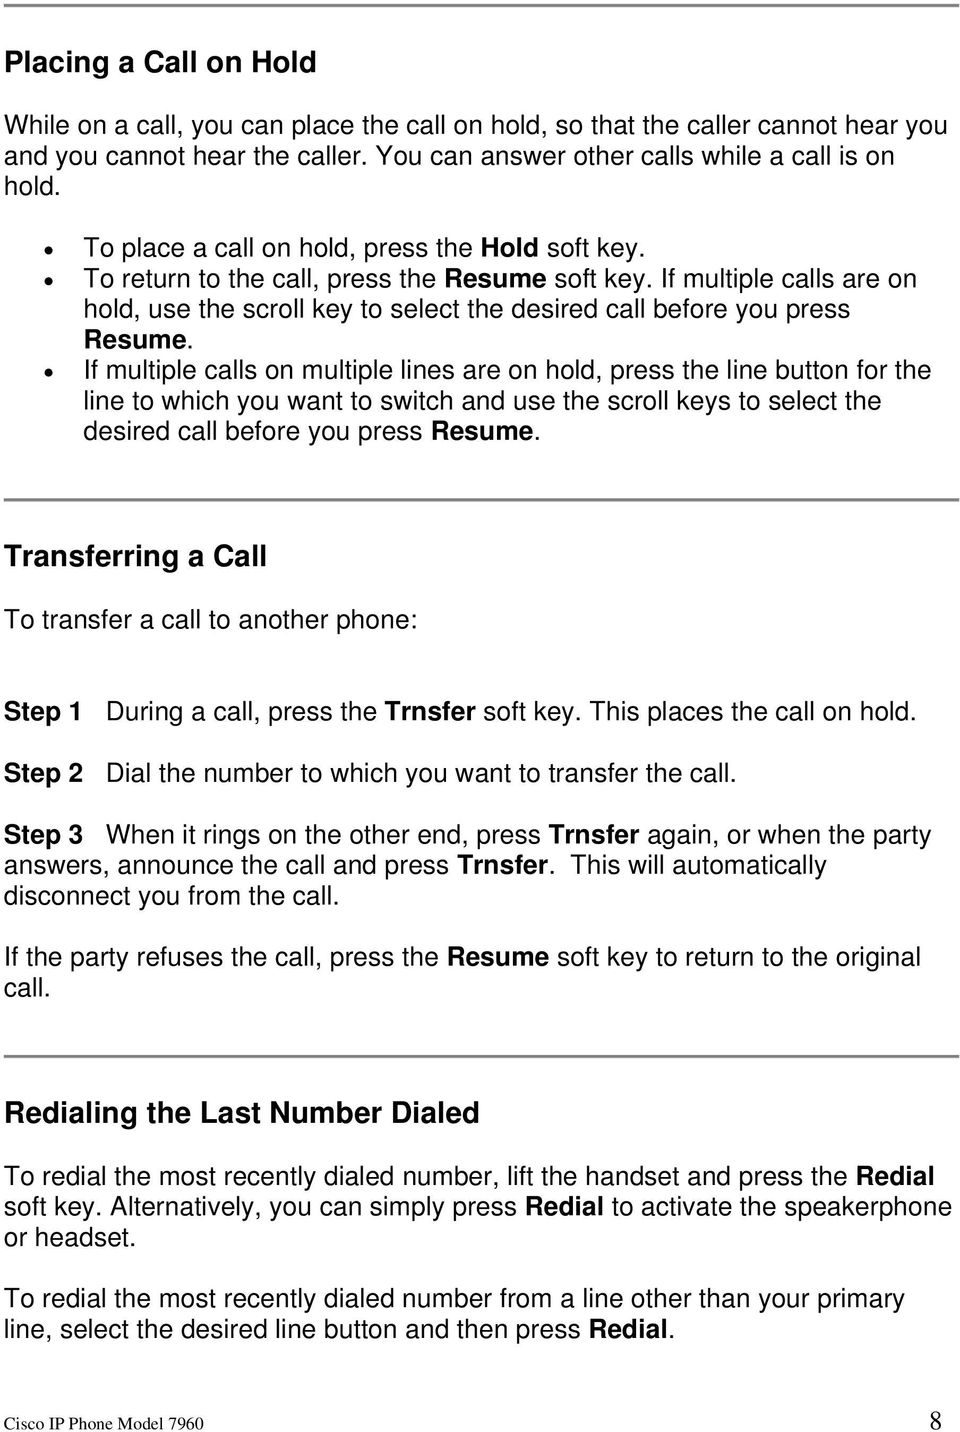 If multiple calls are on hold, use the scroll key to select the desired call before you press Resume.